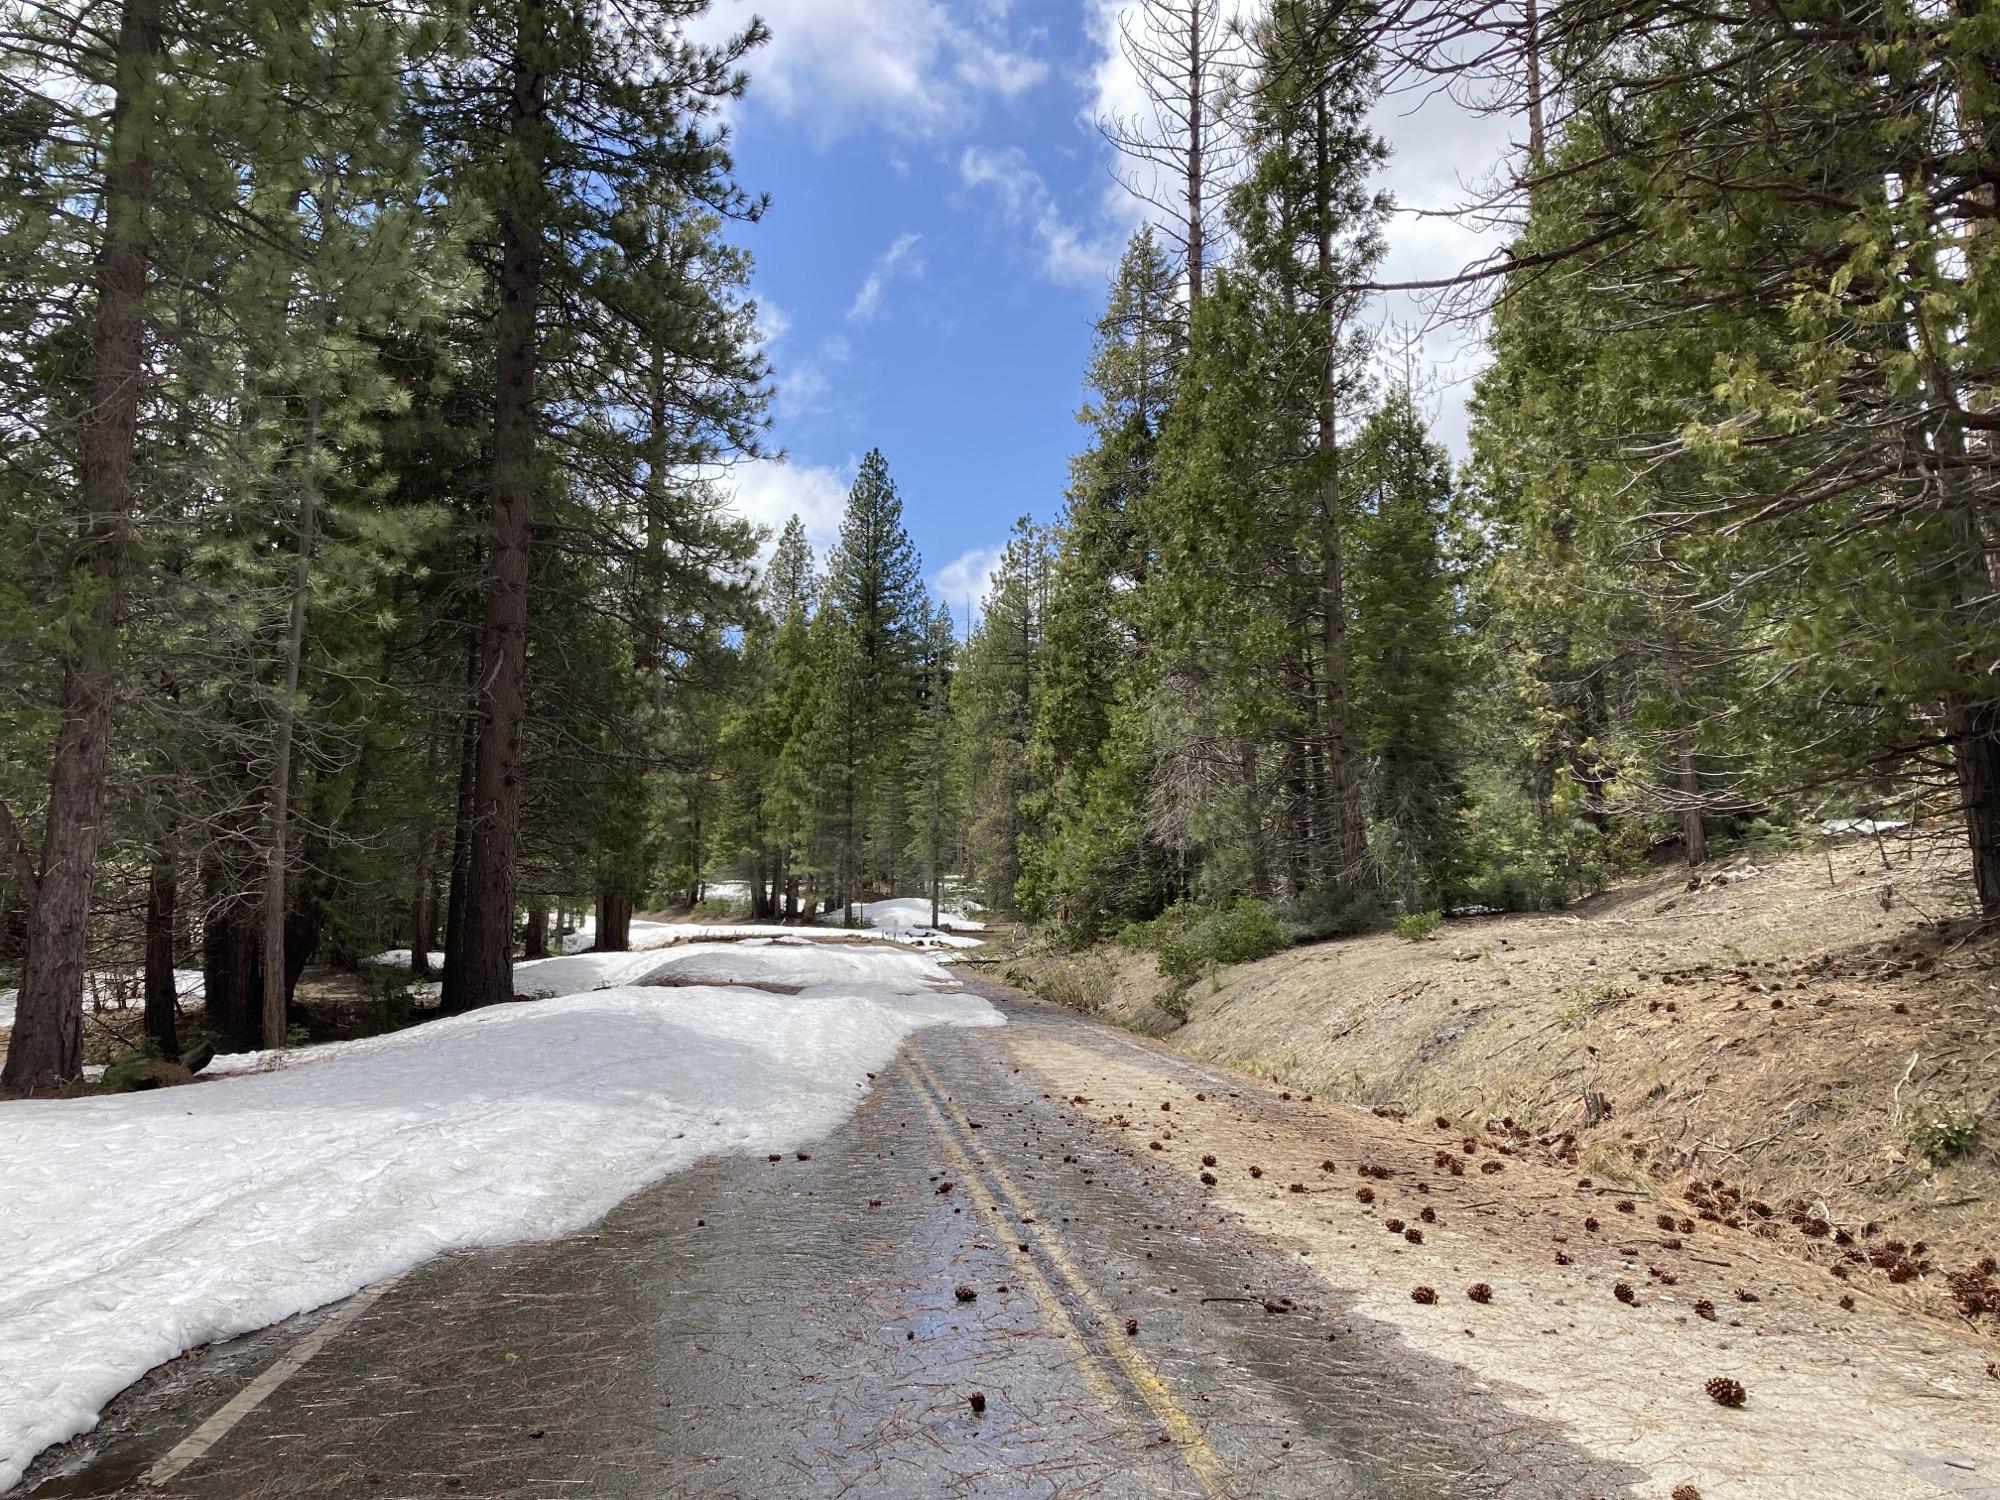 Forest Service Road Number 13S09 Tenmile Road near Bearskin Grove remains snow covered and impassable as of May 13, 2023.